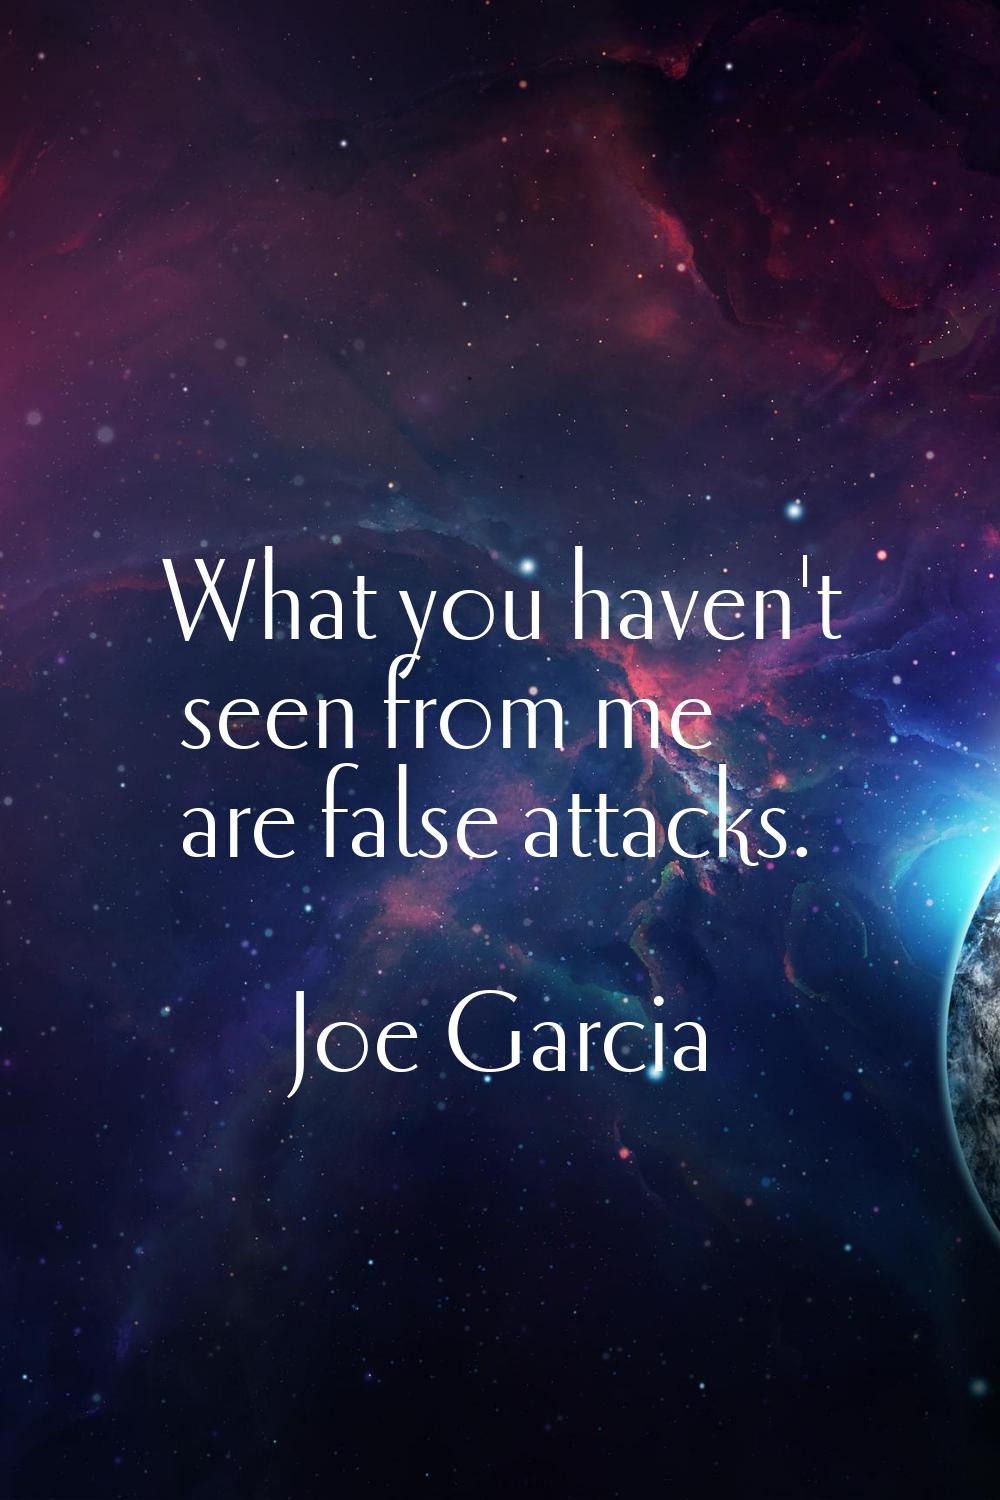 What you haven't seen from me are false attacks.